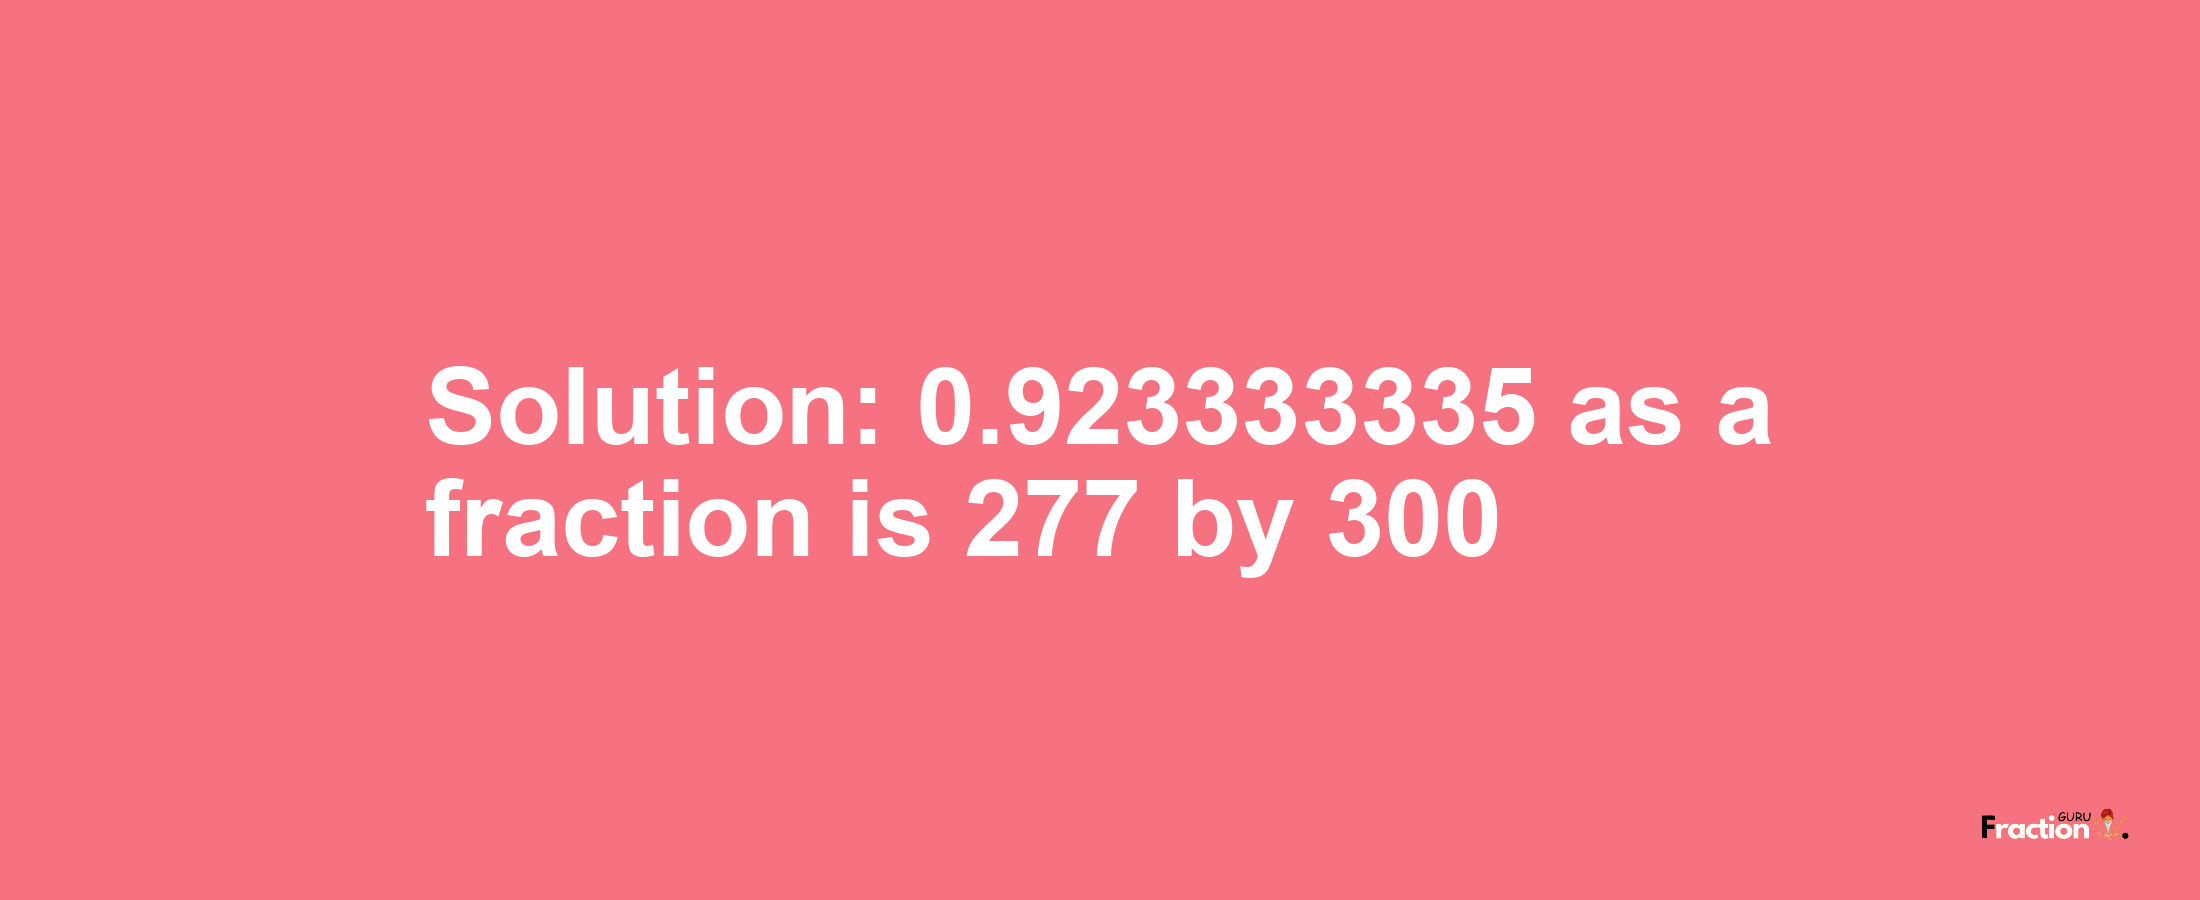 Solution:0.923333335 as a fraction is 277/300